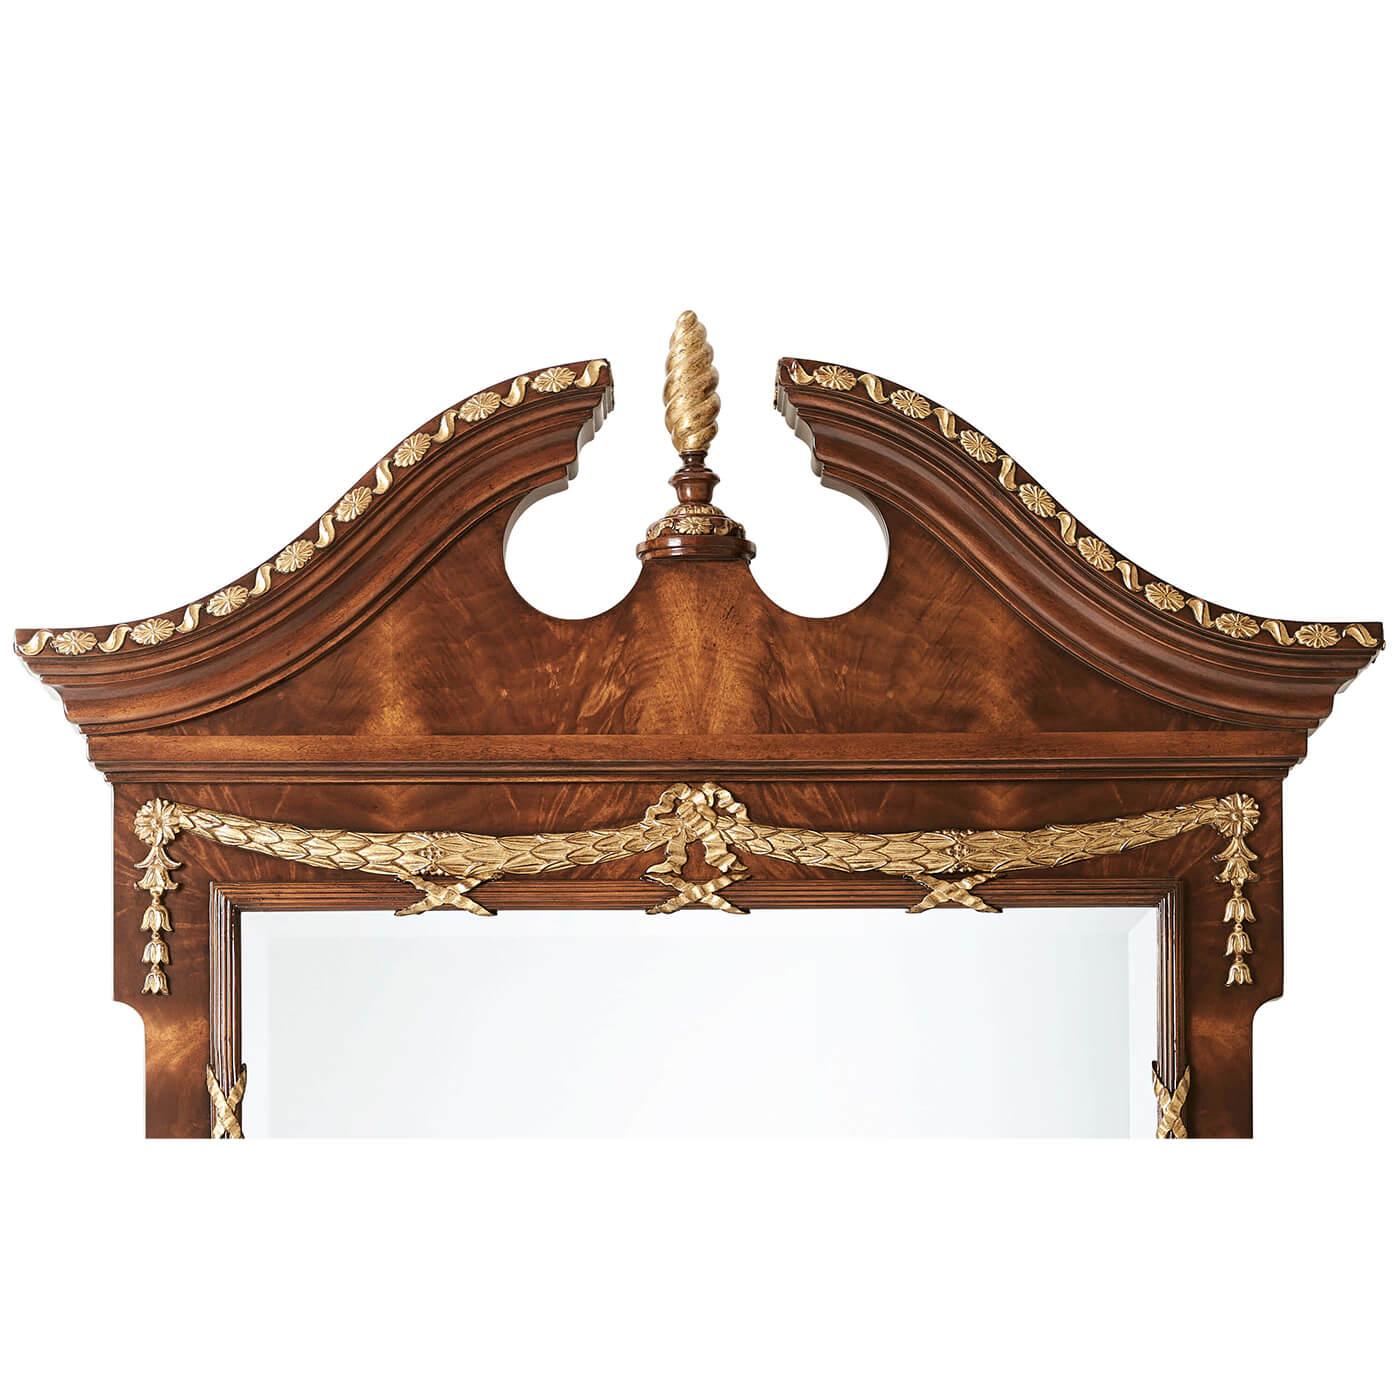 A carved mahogany, flame mahogany veneered and parcel-gilt wall mirror, the arched broken swan neck crest with a carved molding and centered by a spiral carved pinecone finial, the rectangular beveled edge mirror below framed by a bound reed slip